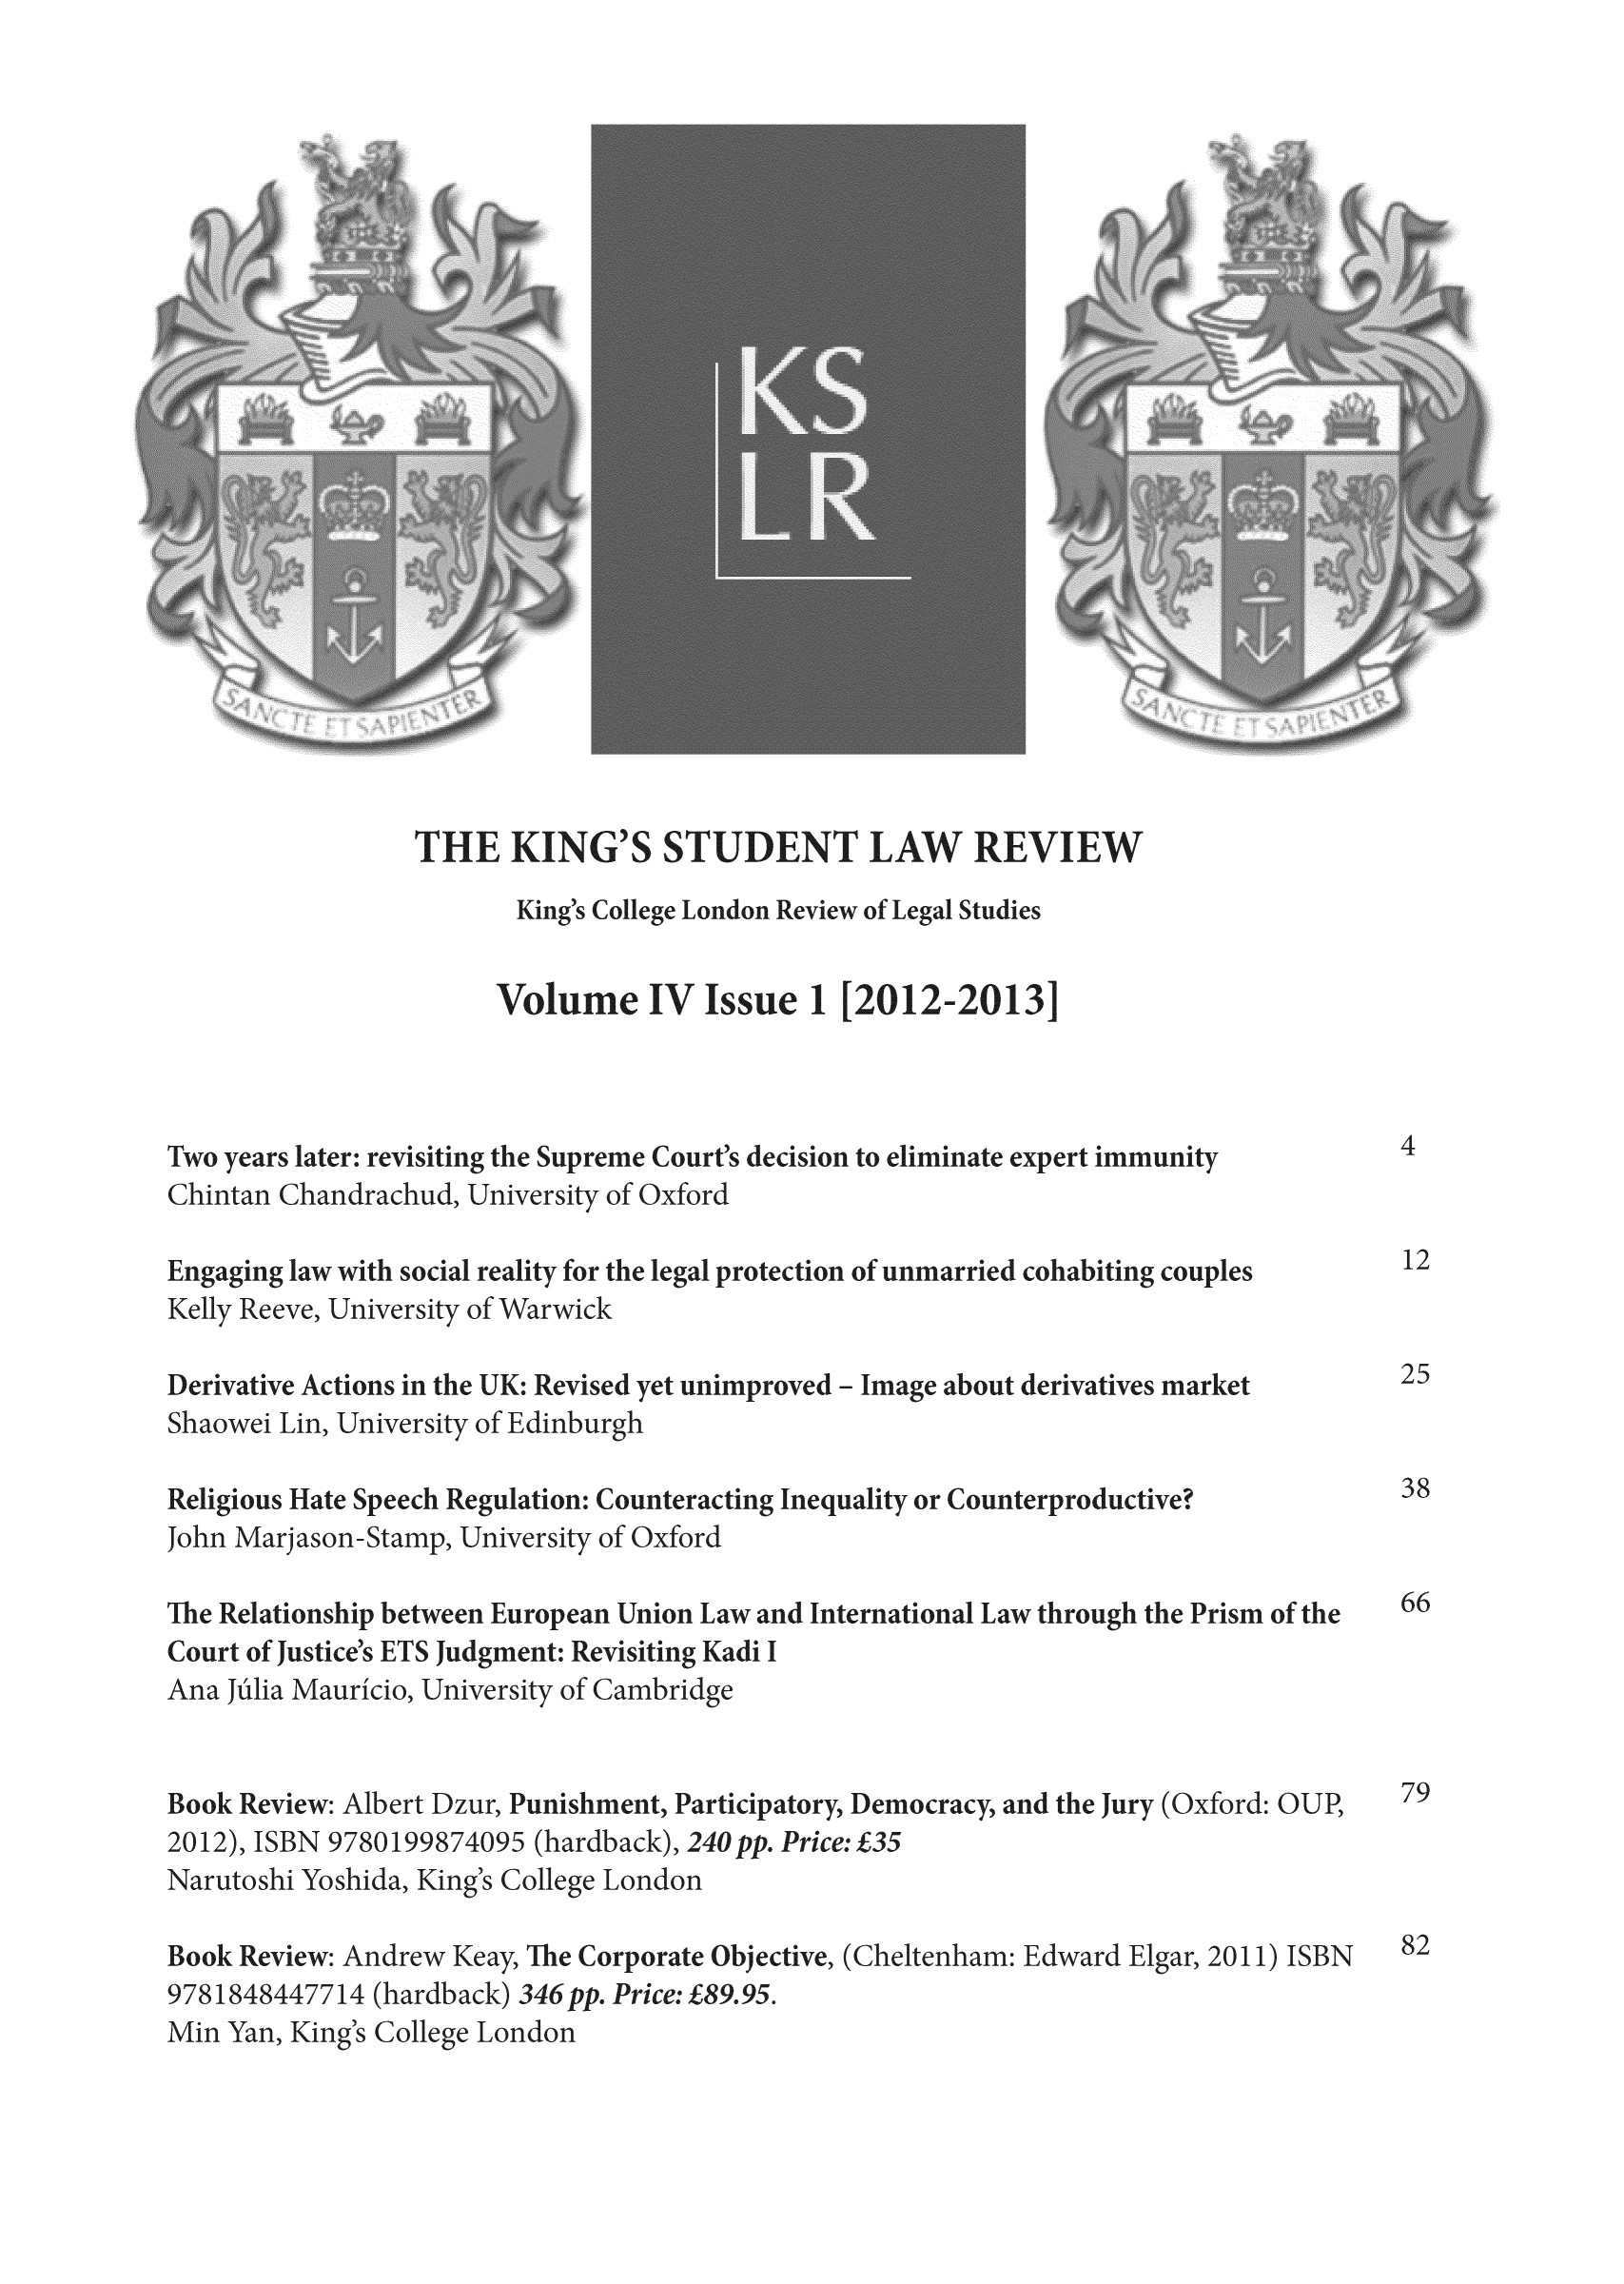 handle is hein.journals/kinstul4 and id is 1 raw text is: ï»¿THE ING'SSTUDENT LAW REVIEW

ig's College London Review of Lega

idies

Volume IV Issue ]

[2012-2013

wo years later: revisiting the Sul
hintan Chandrachud, Universi

me Court's decisio
>f Oxford

Engaging law with social reality for the legal protection of unmal
Kelly Reeve, University of Warwick

cohabiting cot

Sh

vative Actons in the UK: R
awei Lin, University of Edi

eligious Hate Sp
ohn Marjason-Sl

The Relationship bet
Court of Justice's ETS
Ana hilia Mauricio,

evised yet unimprov
nburgh

eech Regulation: Counteracti
amo, University of Oxford

ween Eur
Judgme
Universi-

opean Union Law and
ut: Revisiting Kadi I
ty of CambrdAe

iae about derivatives market

equality or Countc

oductive

nternational Law through the Prism of tl

9780
shida

rt Dzur,
1998740c,
, King's I

rishment, Participatory,
(hardback), 240 pp. Price
Ilege London

Book Review: Andrew Keay, The Corporate Objective, (Cheltenl
9781848447714 (hardback) 346 pp. Price: Â£89.95.
Min Yan, King's College London

iocracy, and the Jury (Oxford: O

Â£3%

d: Edward Ear, 20

s

n to e   aliminate

rt immunity

es

ook Revil
012), ISB
Tarutoshi


